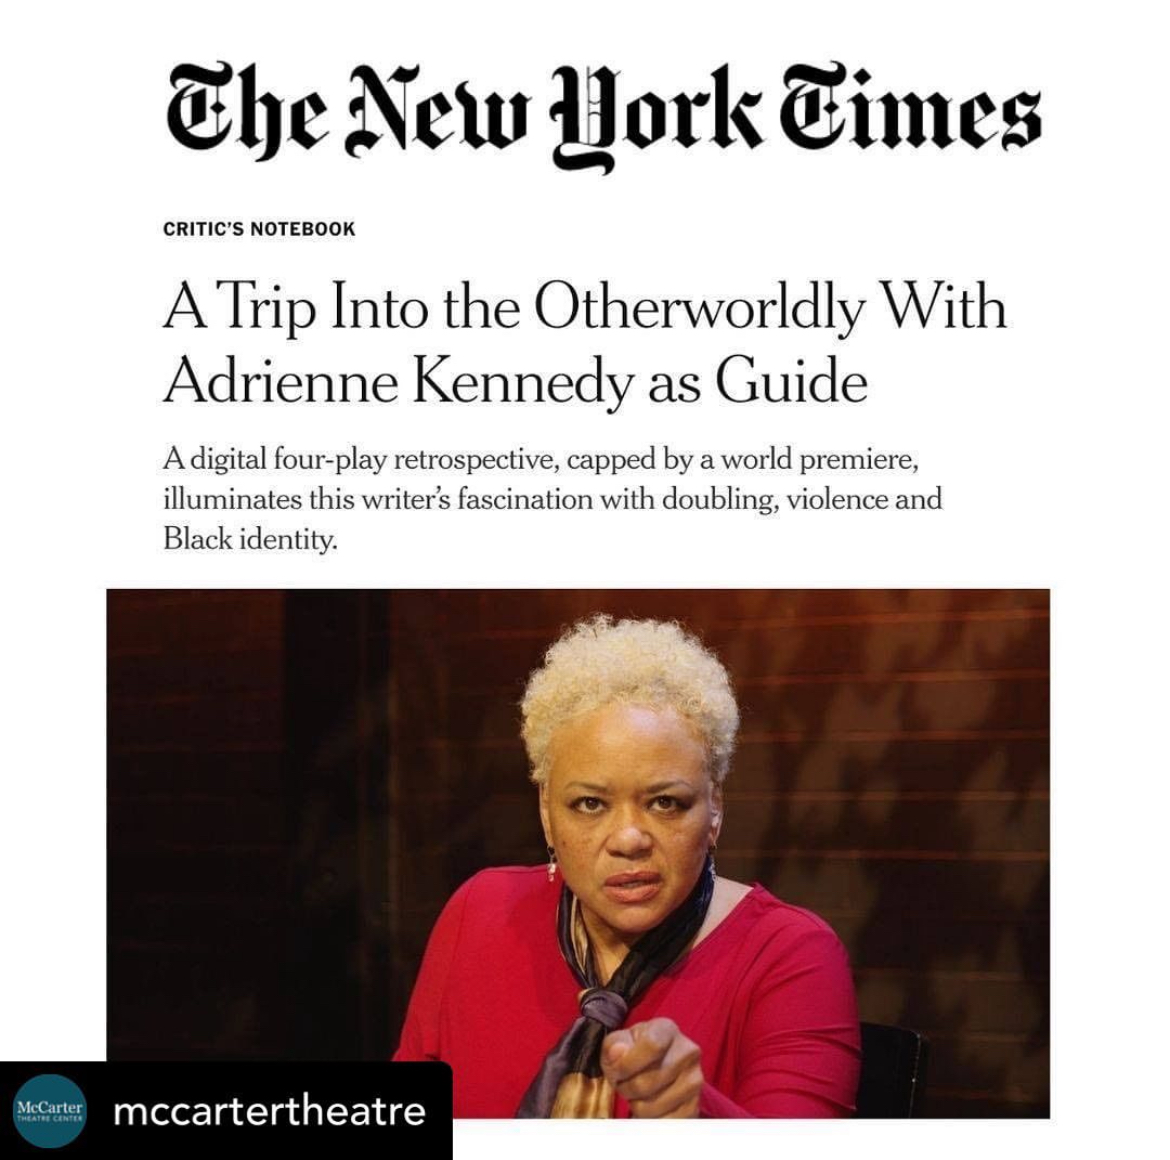 New York Times, Critic's Notebook: A Trip Into the Otherworldly With Adrienne Kennedy as Guide